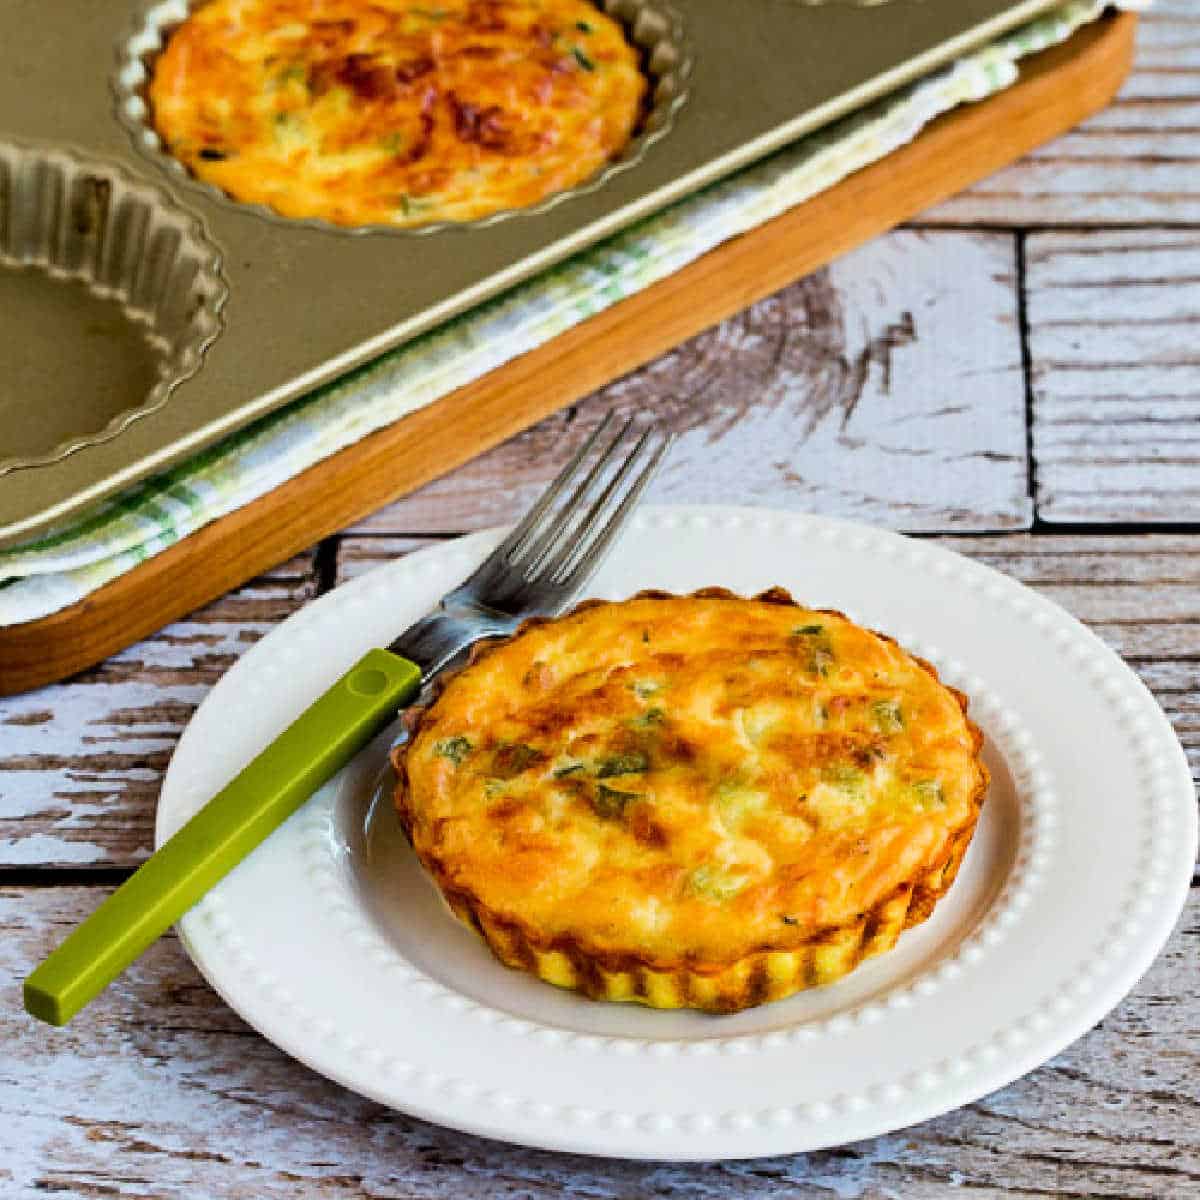 Square image for Crustless Breakfast Tarts with Asparagus shown with one breakfast tart on plate with fork, and tart pan in the back.